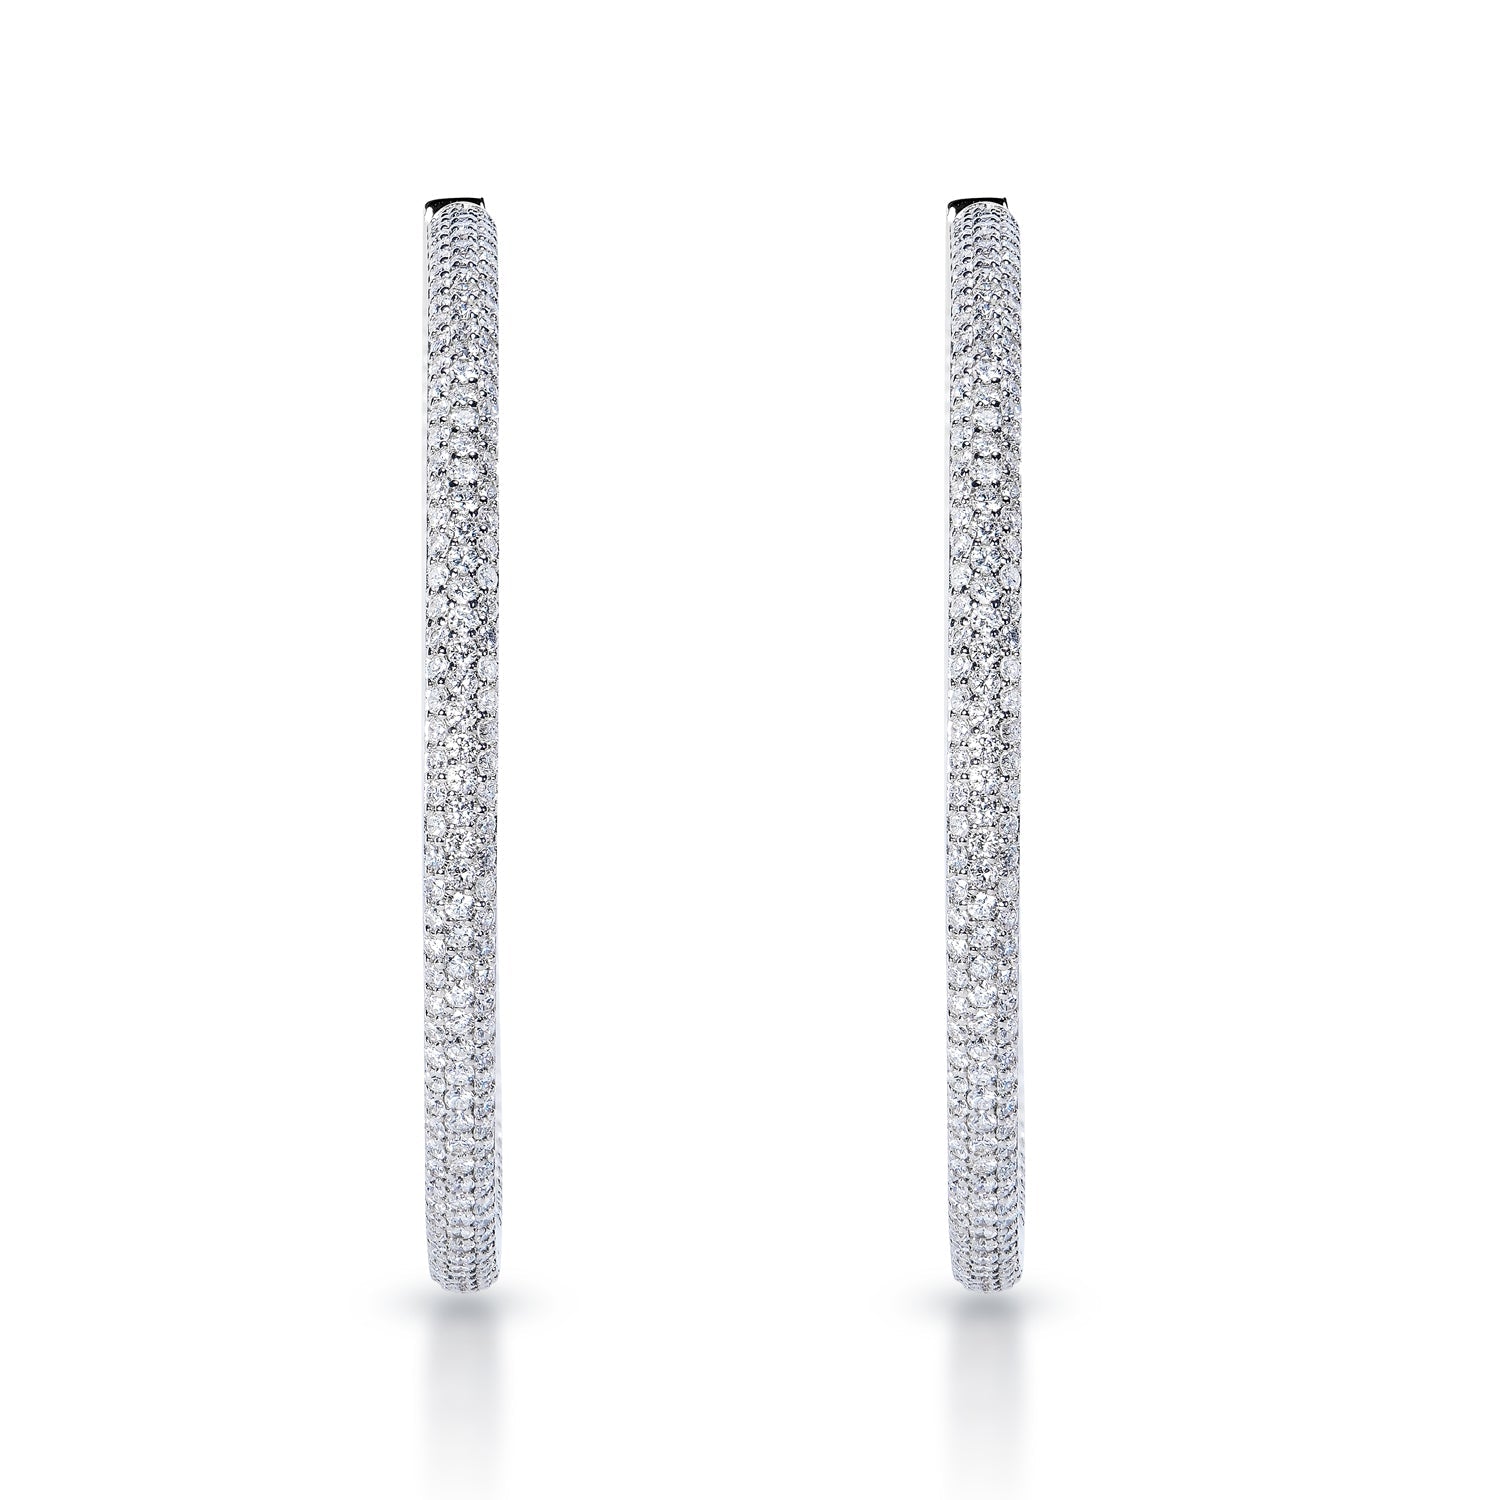 Emily 2 Inch Pave Diamond Hoops 6 Carat Diamond Earrings 14k White Gold Front View